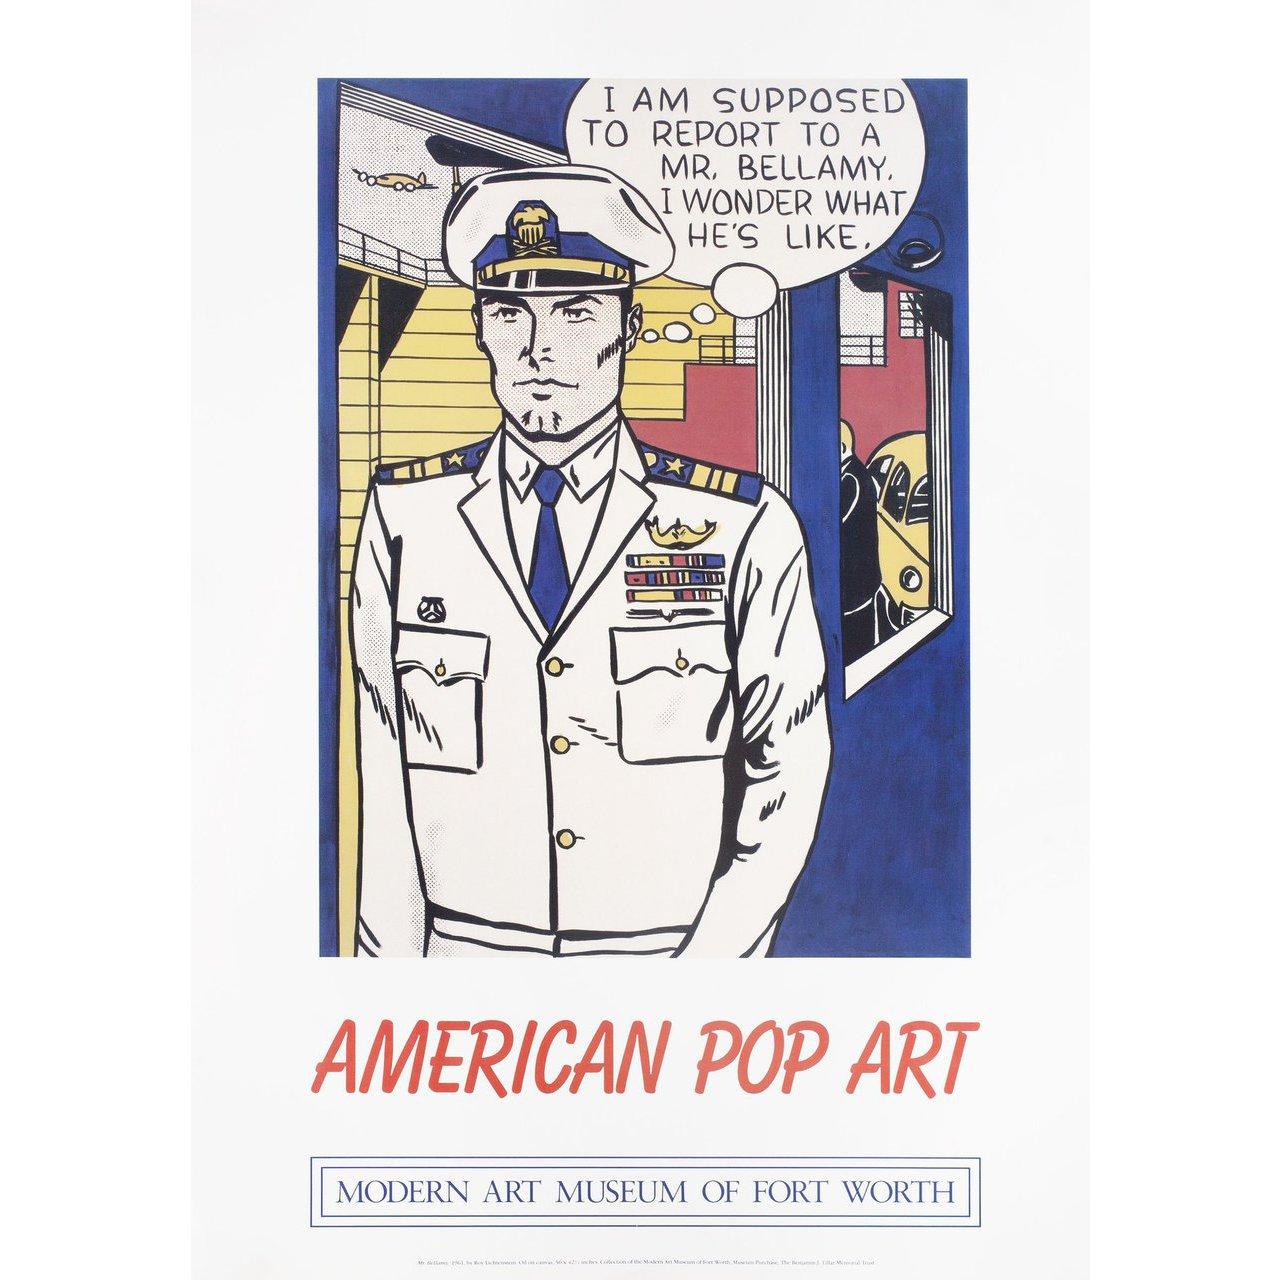 Original 2012 U.S. poster by Roy Lichtenstein for the exhibition American Pop Art. Fine condition, rolled with slight edge wear. Please note: the size is stated in inches and the actual size can vary by an inch or more.